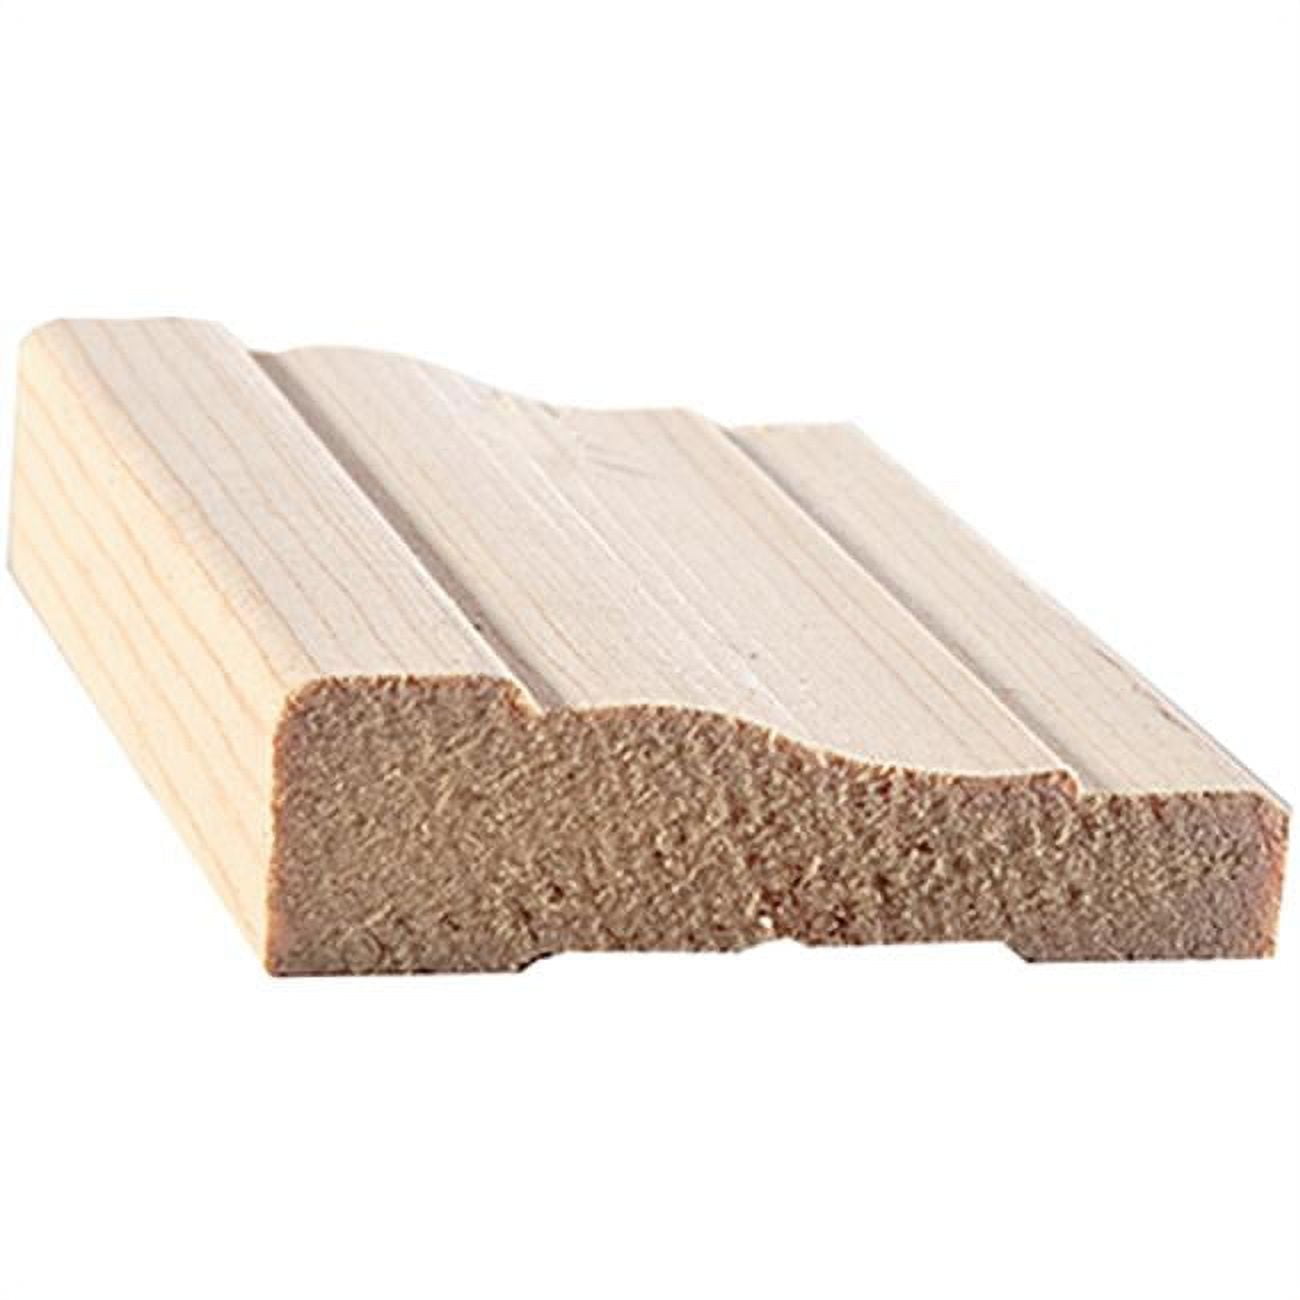 356-s 7 Ft. Colonial Casing Moulding, Natural - 0.69 X 2.25 In. - Pack Of 5